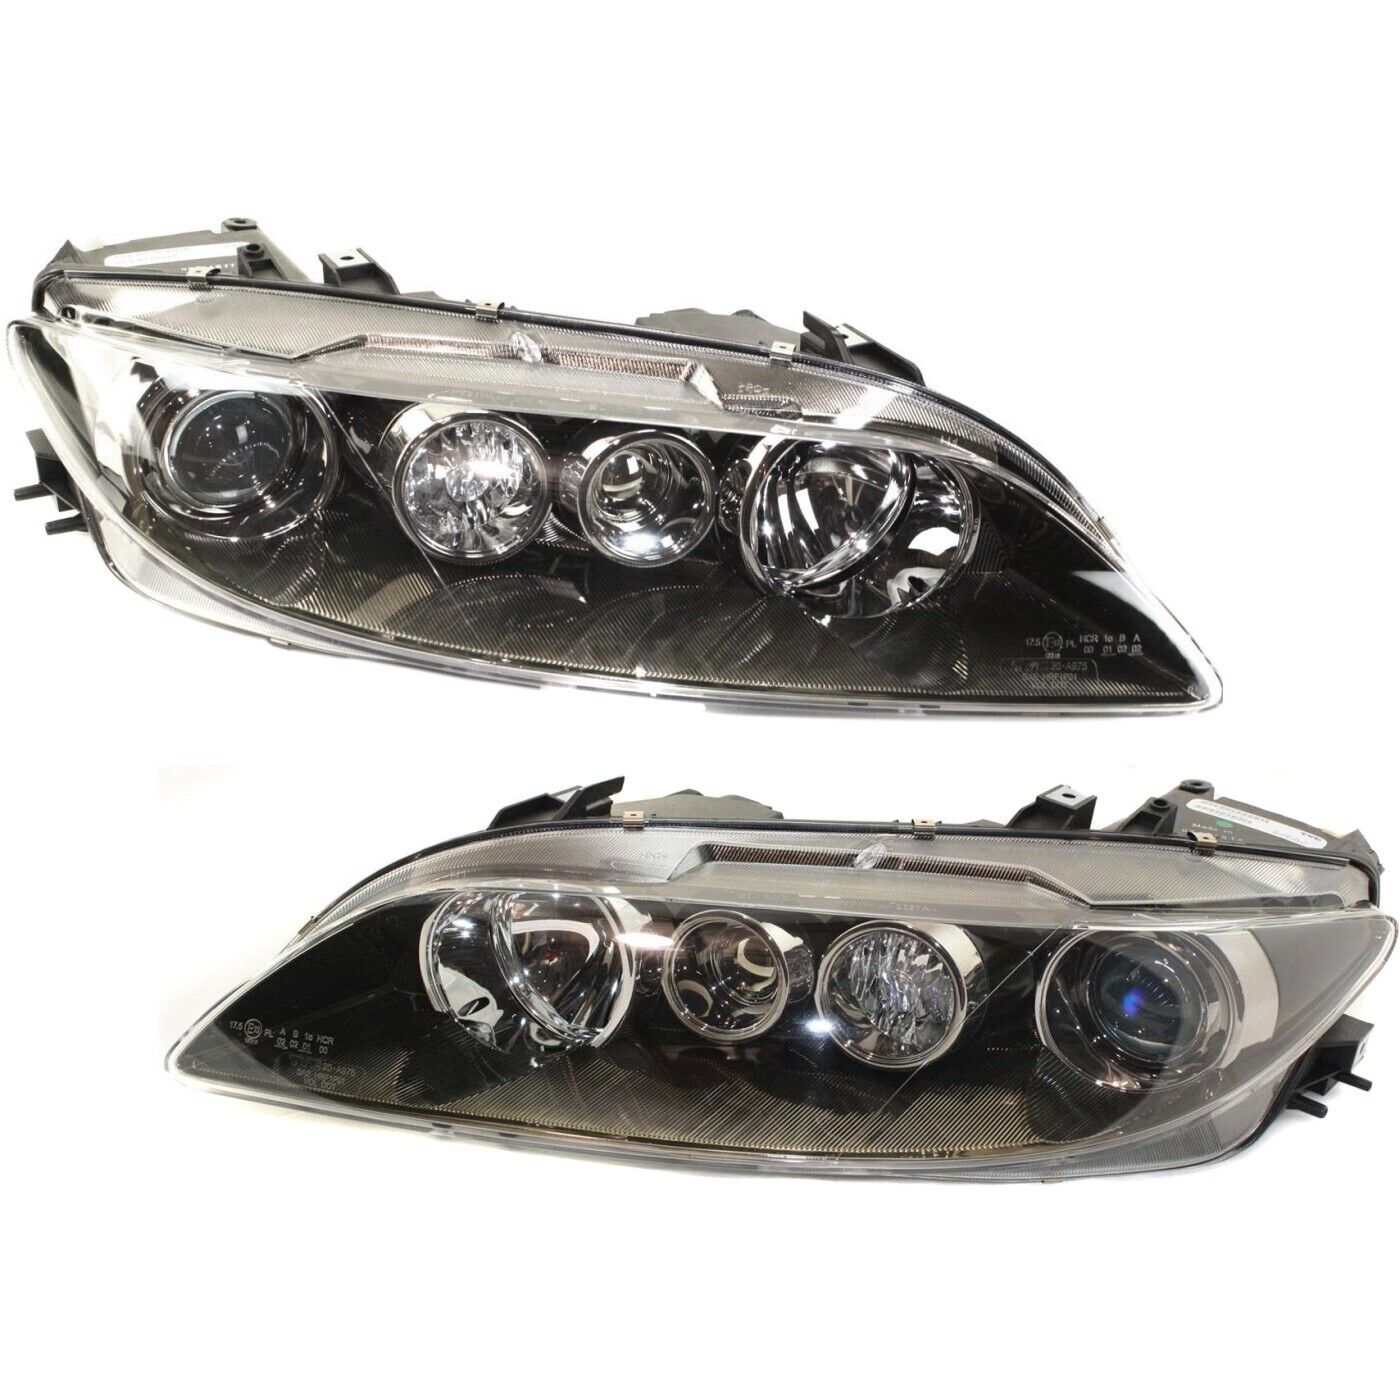 Headlight Set For 2006 2007 2008 Mazda 6 Left and Right Standard Type 2Pc